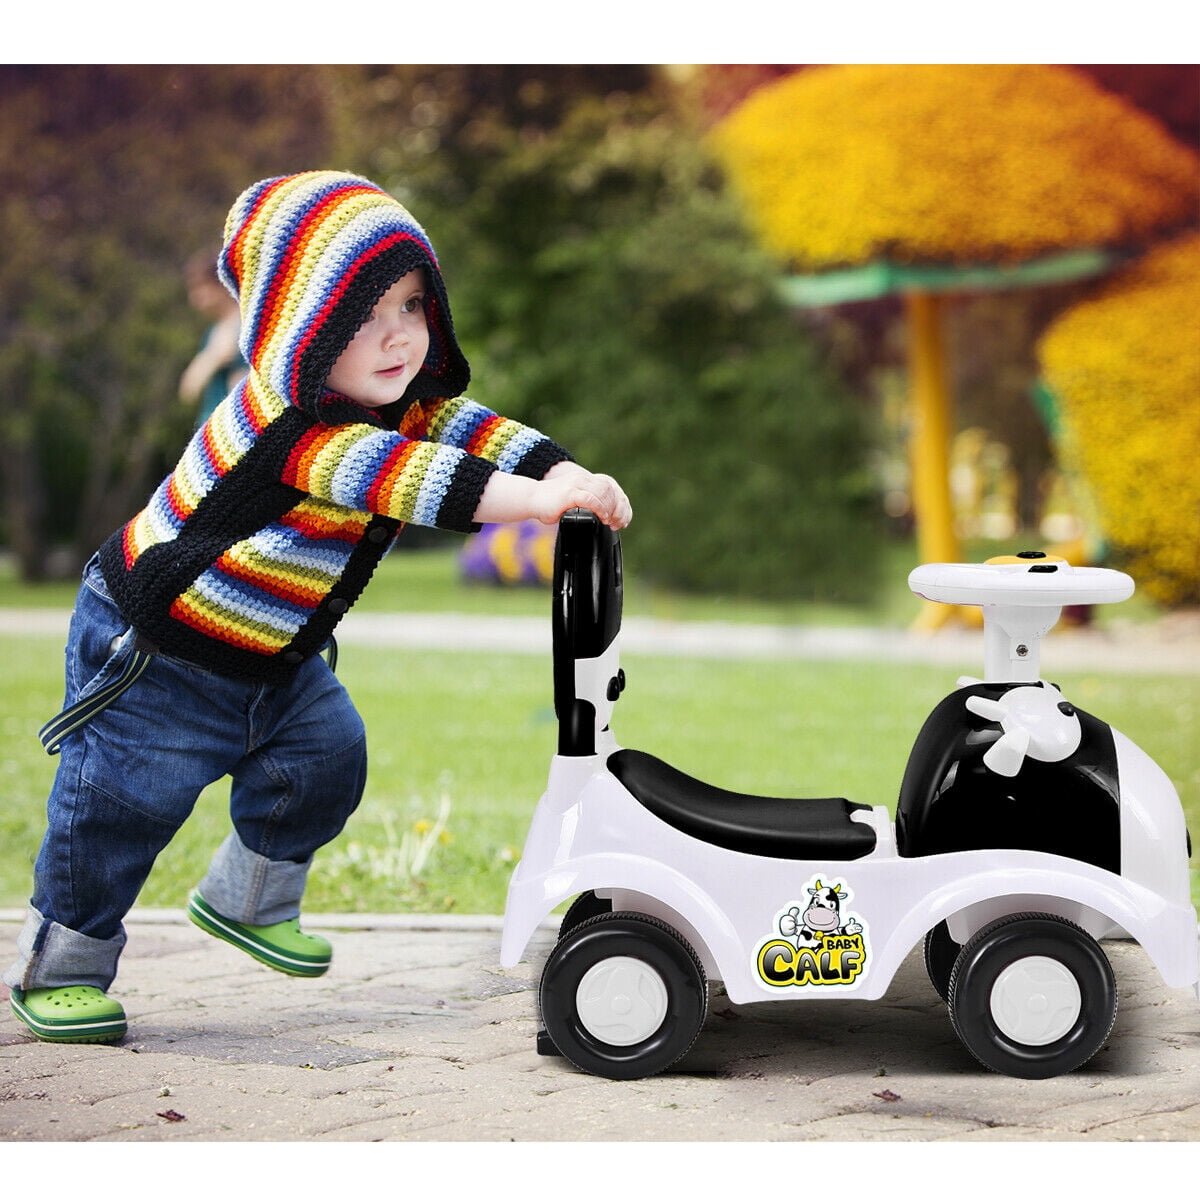 Details about   Gymax 3-in-1 Baby Walker Sliding Car Pushing Cart Toddler Ride On Toy Sound New 